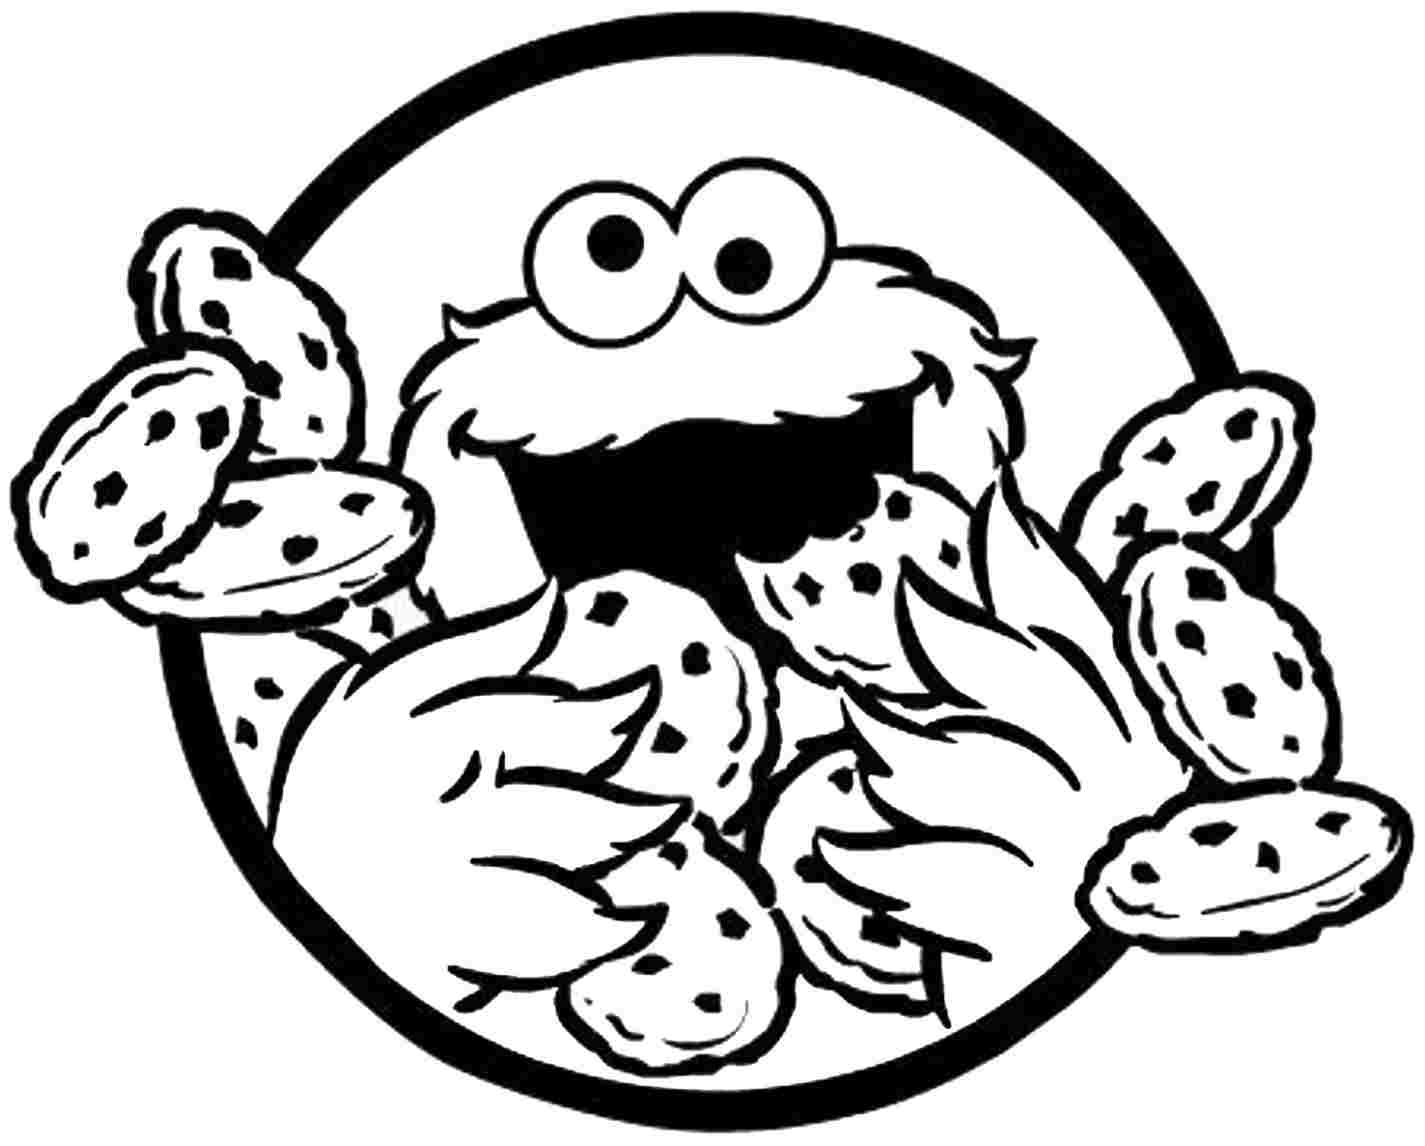 Cookie Monster Cokie Monster Coloring Page Coloring Pages For Kids And 